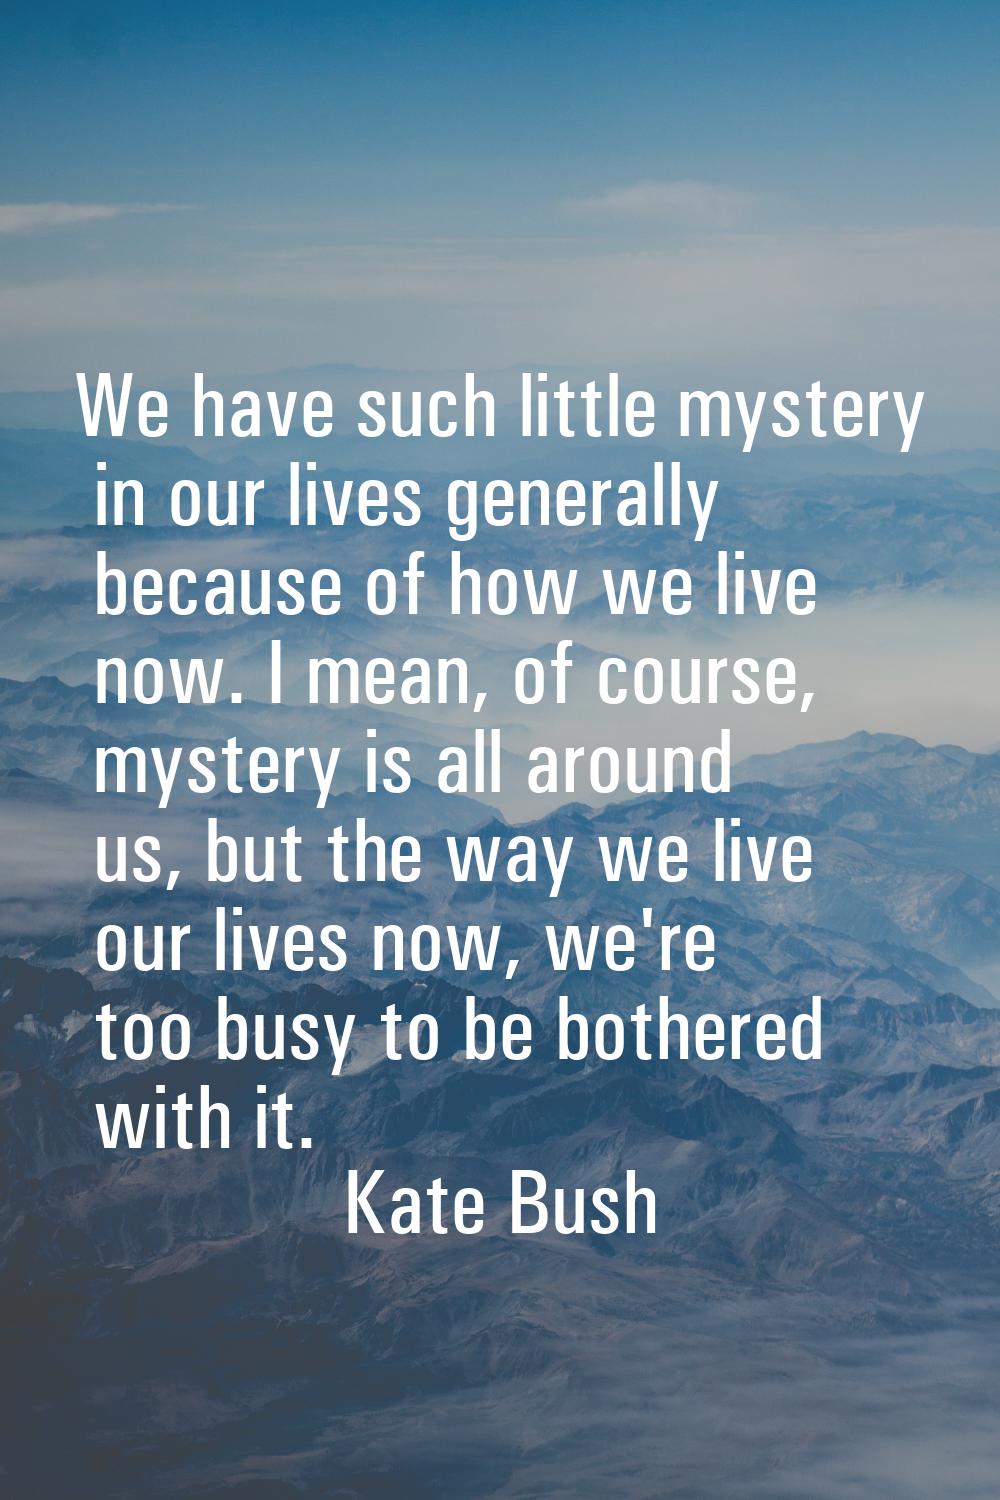 We have such little mystery in our lives generally because of how we live now. I mean, of course, m